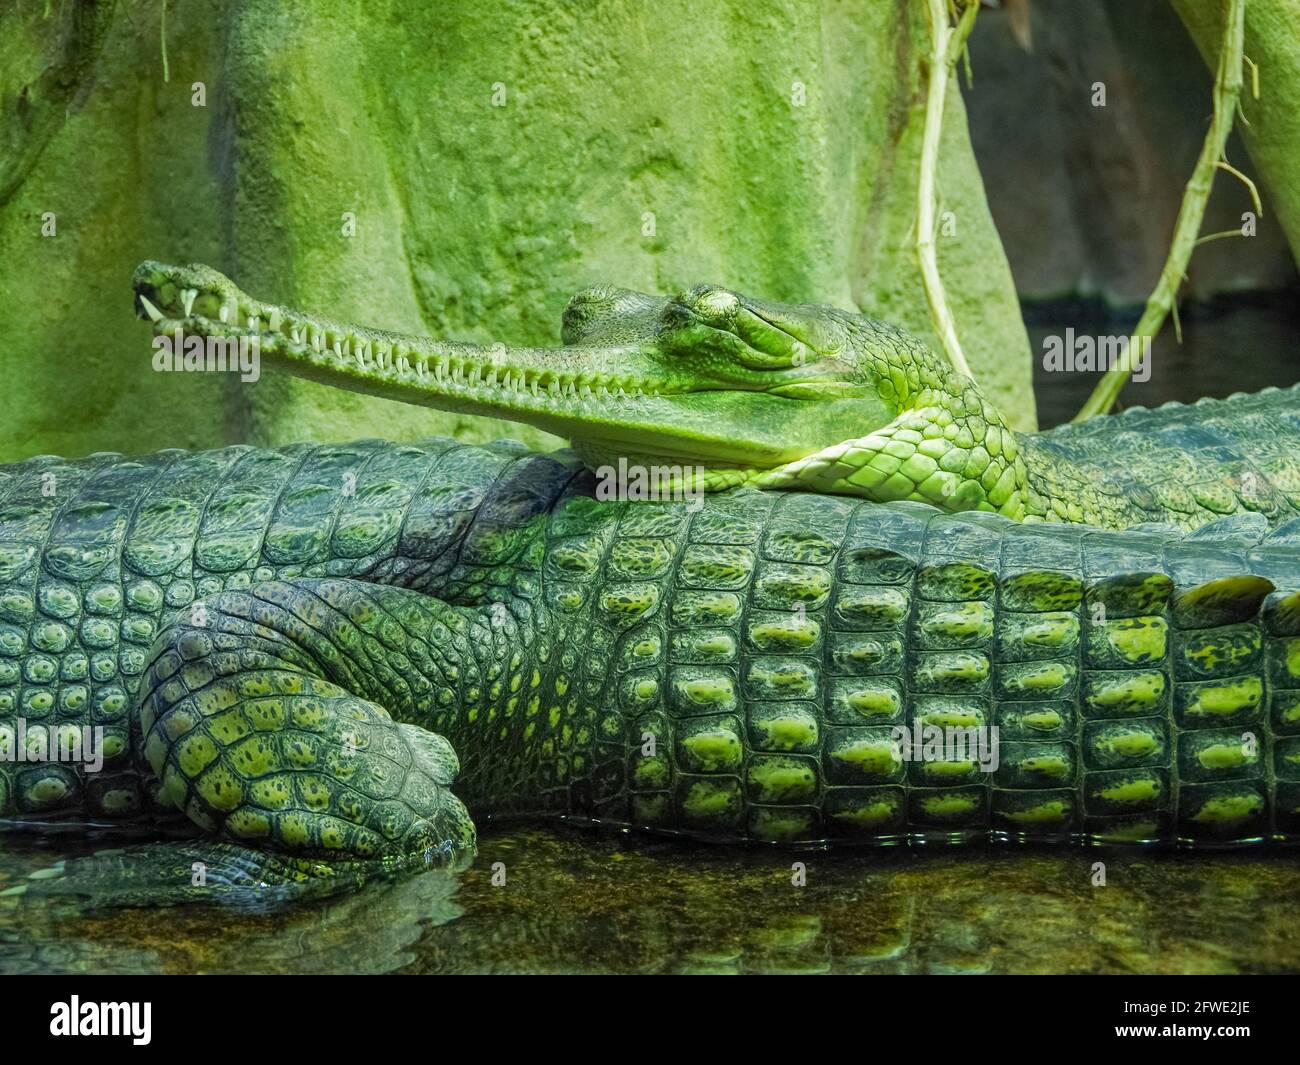 Detail photo of Gharial. The gharial (Gavialis gangeticus), also known as the gavial, fish-eating crocodile is a crocodilian in the family Gavialidae. Stock Photo